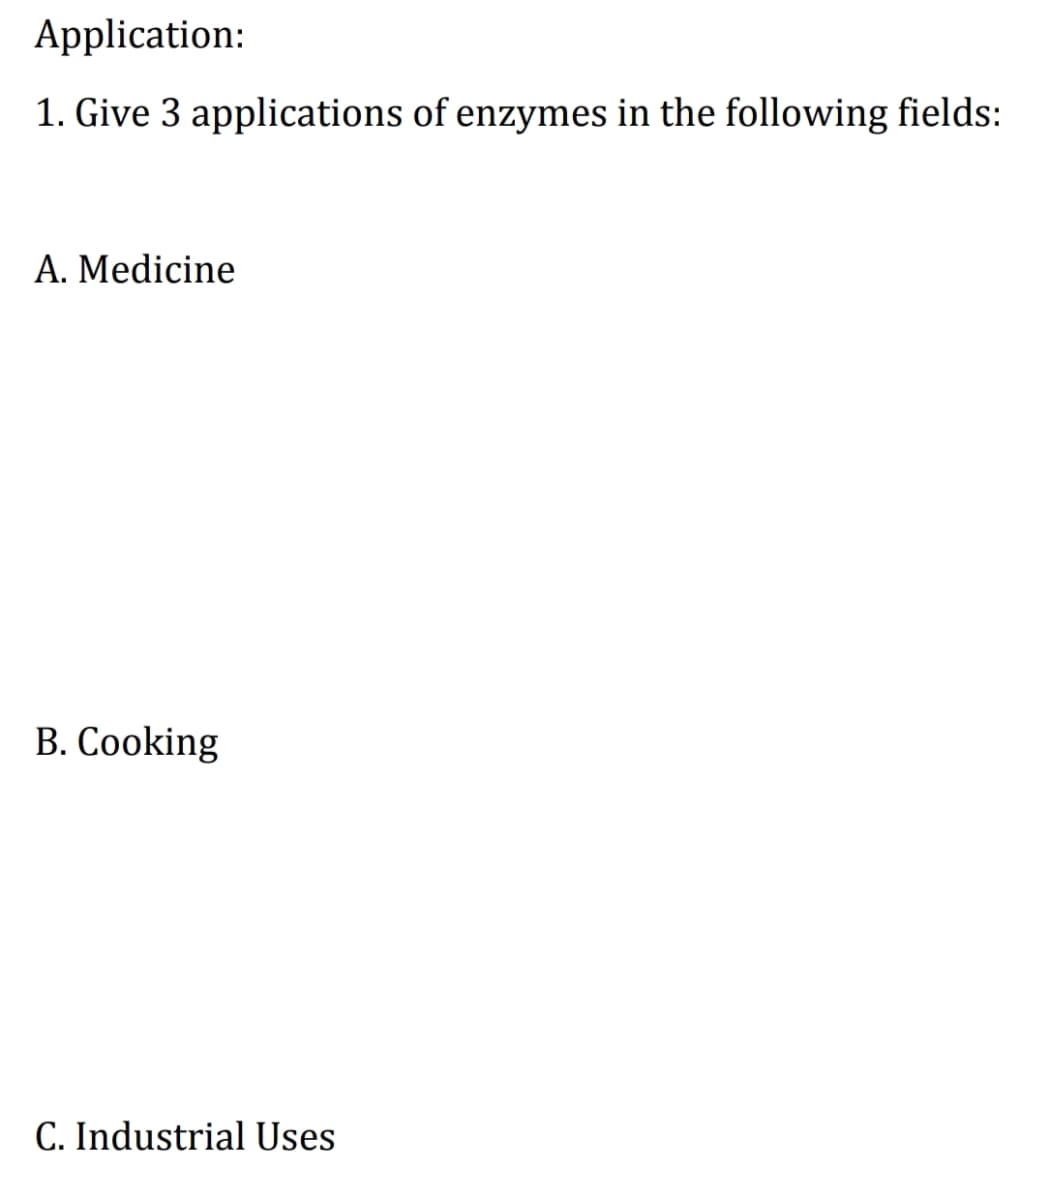 Application:
1. Give 3 applications of enzymes in the following fields:
A. Medicine
B. Cooking
C. Industrial Uses
